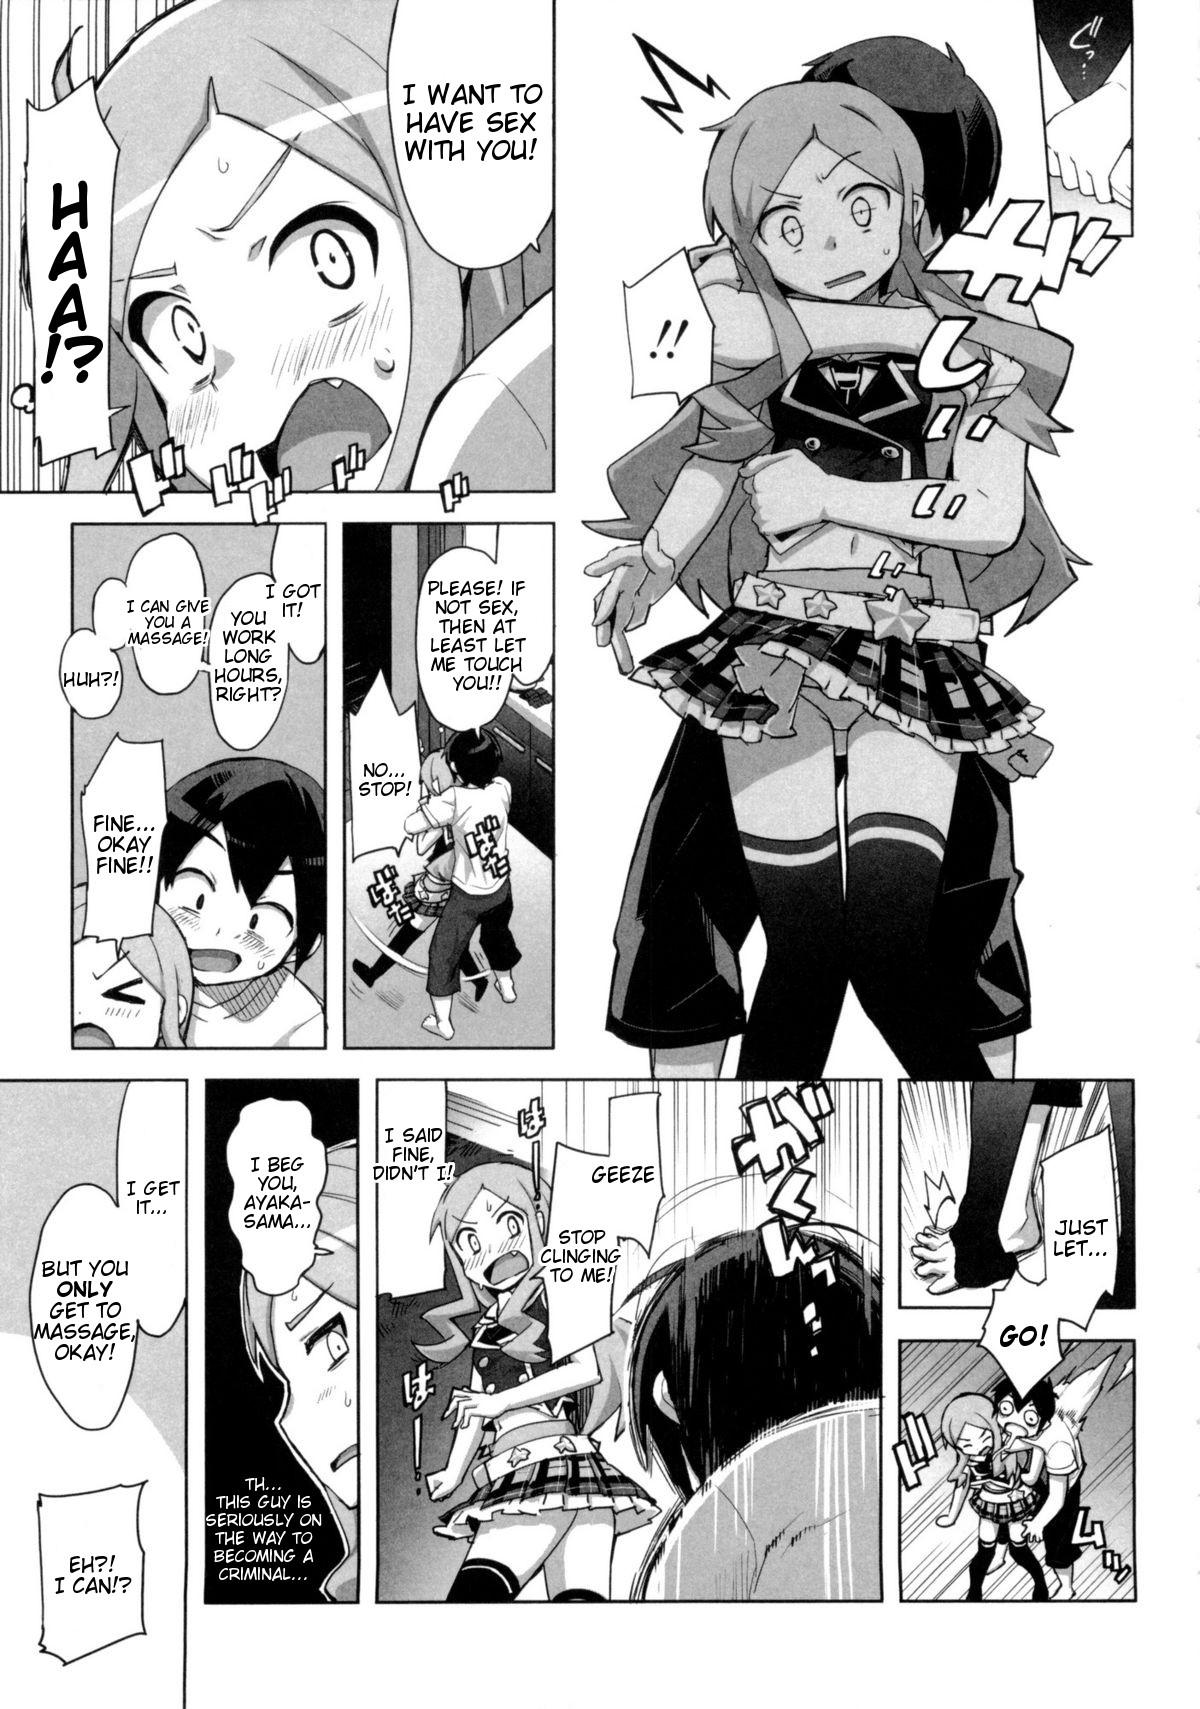 Cumming Idol Sister Ch. 0 Picked Up - Page 5